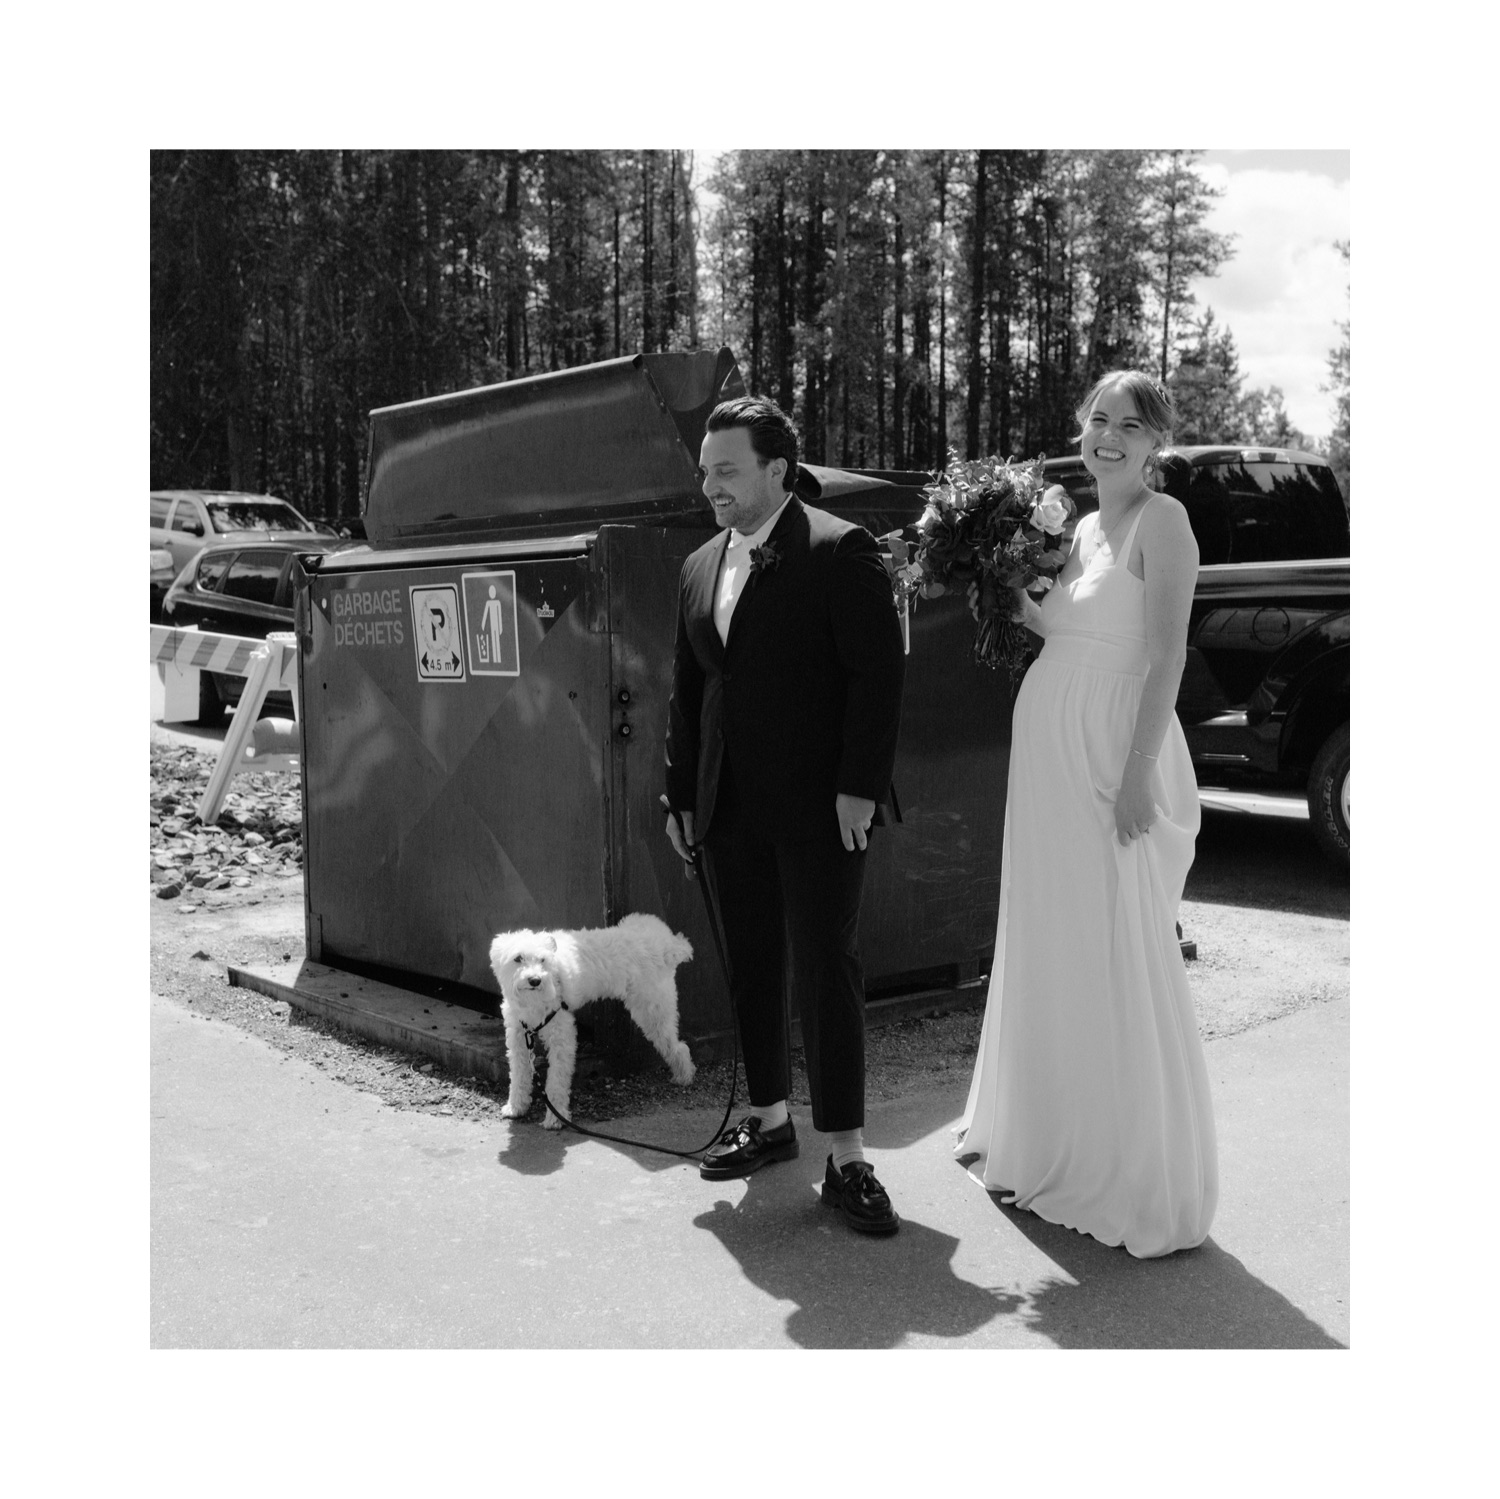 White schnauzer lifting a leg and peeing on a large dumpster in a parking lot as couple in wedding attire looks embarrassingly on while laughing